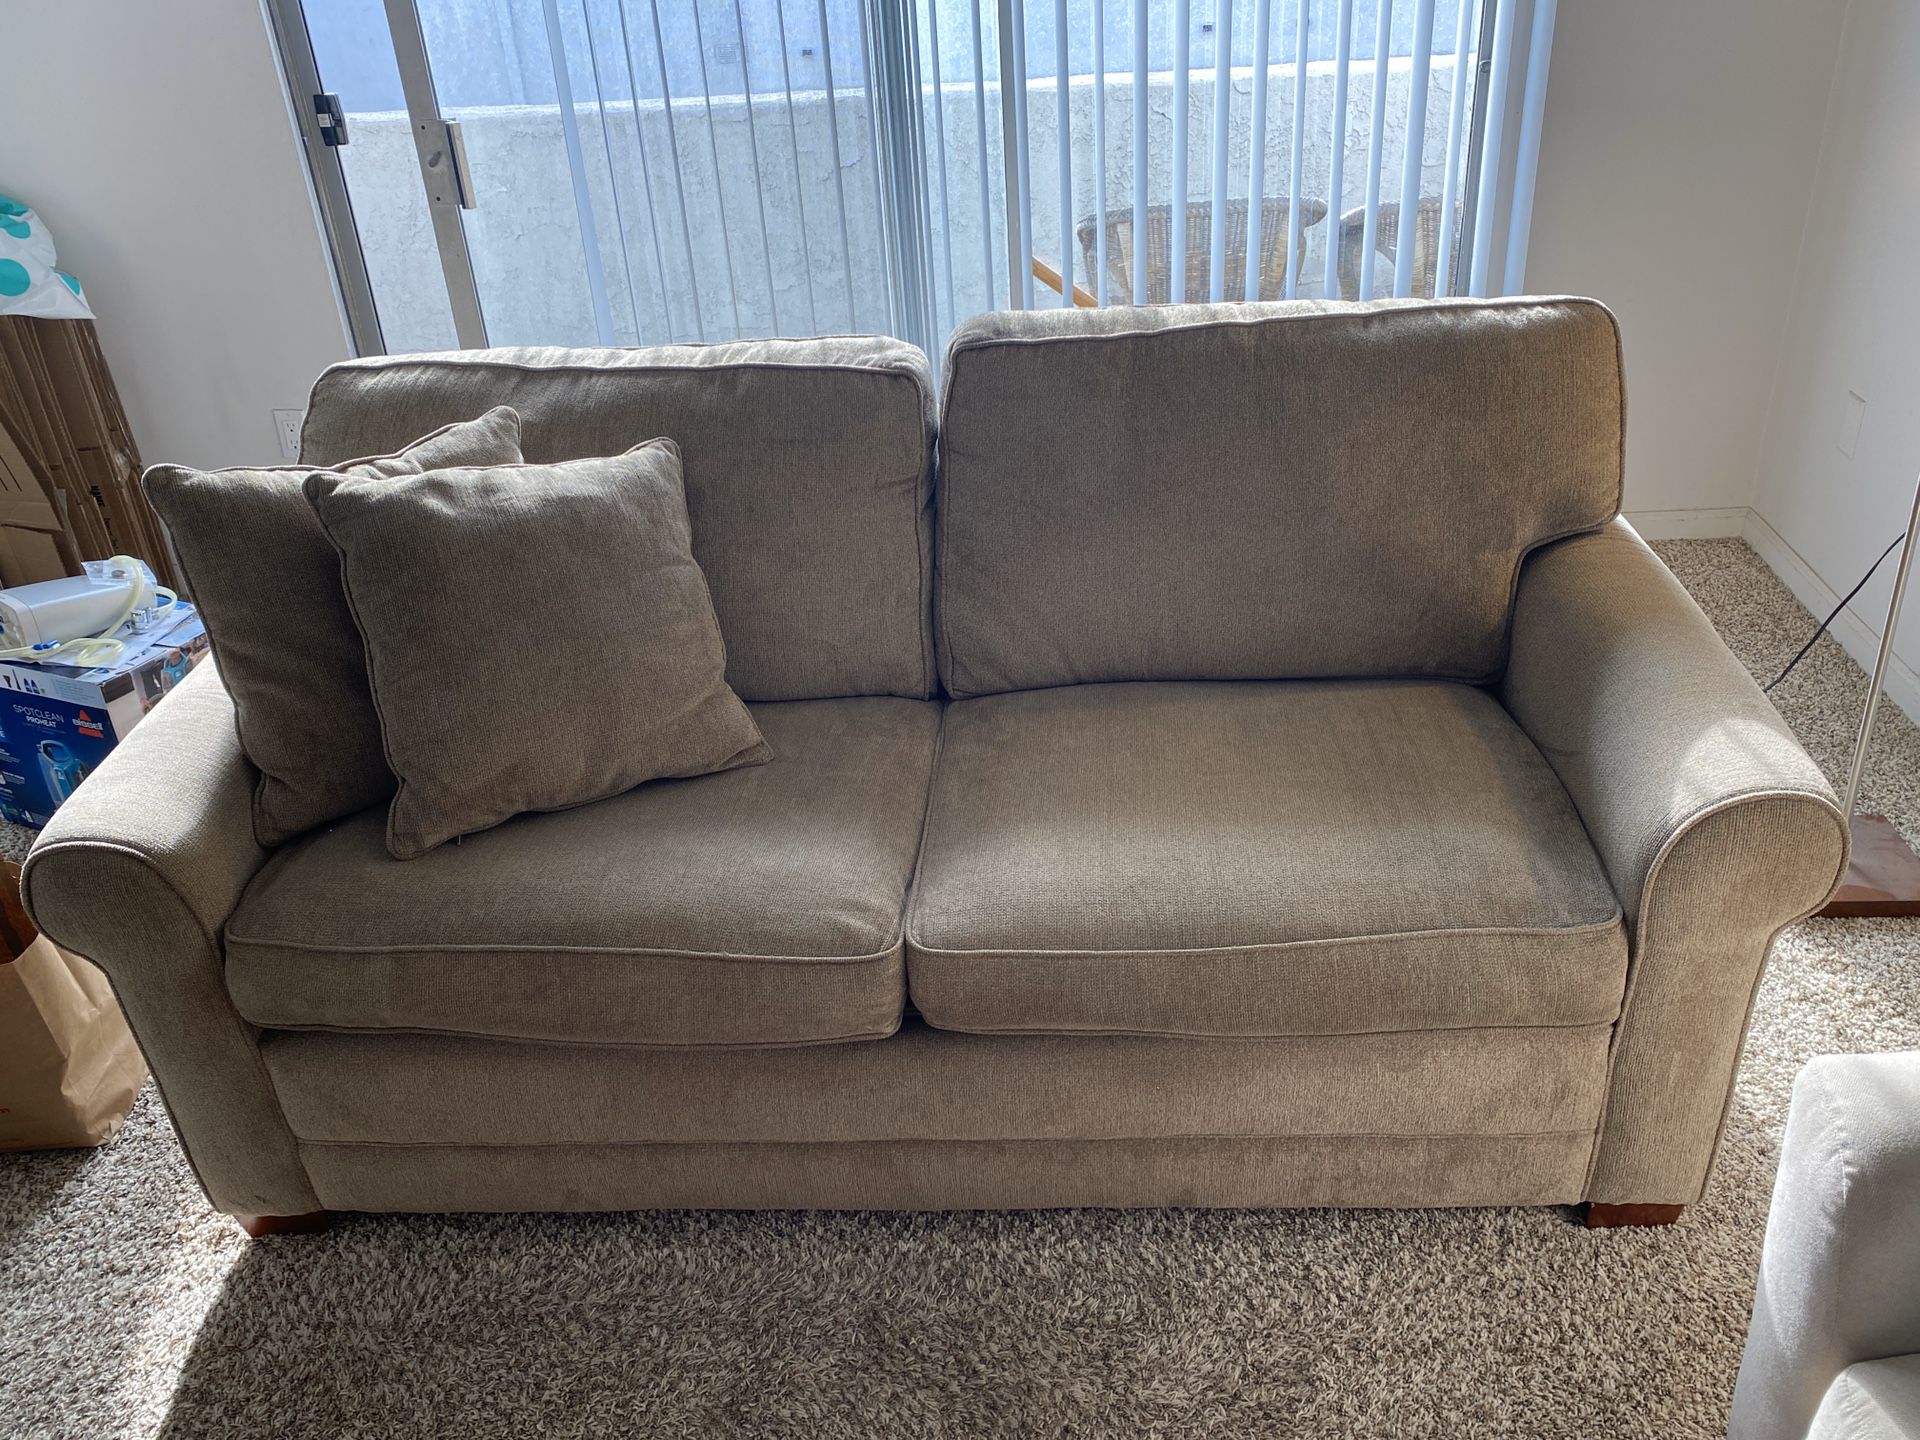 Costco Loveseat Sofa & Fold-our Sleeper Bed